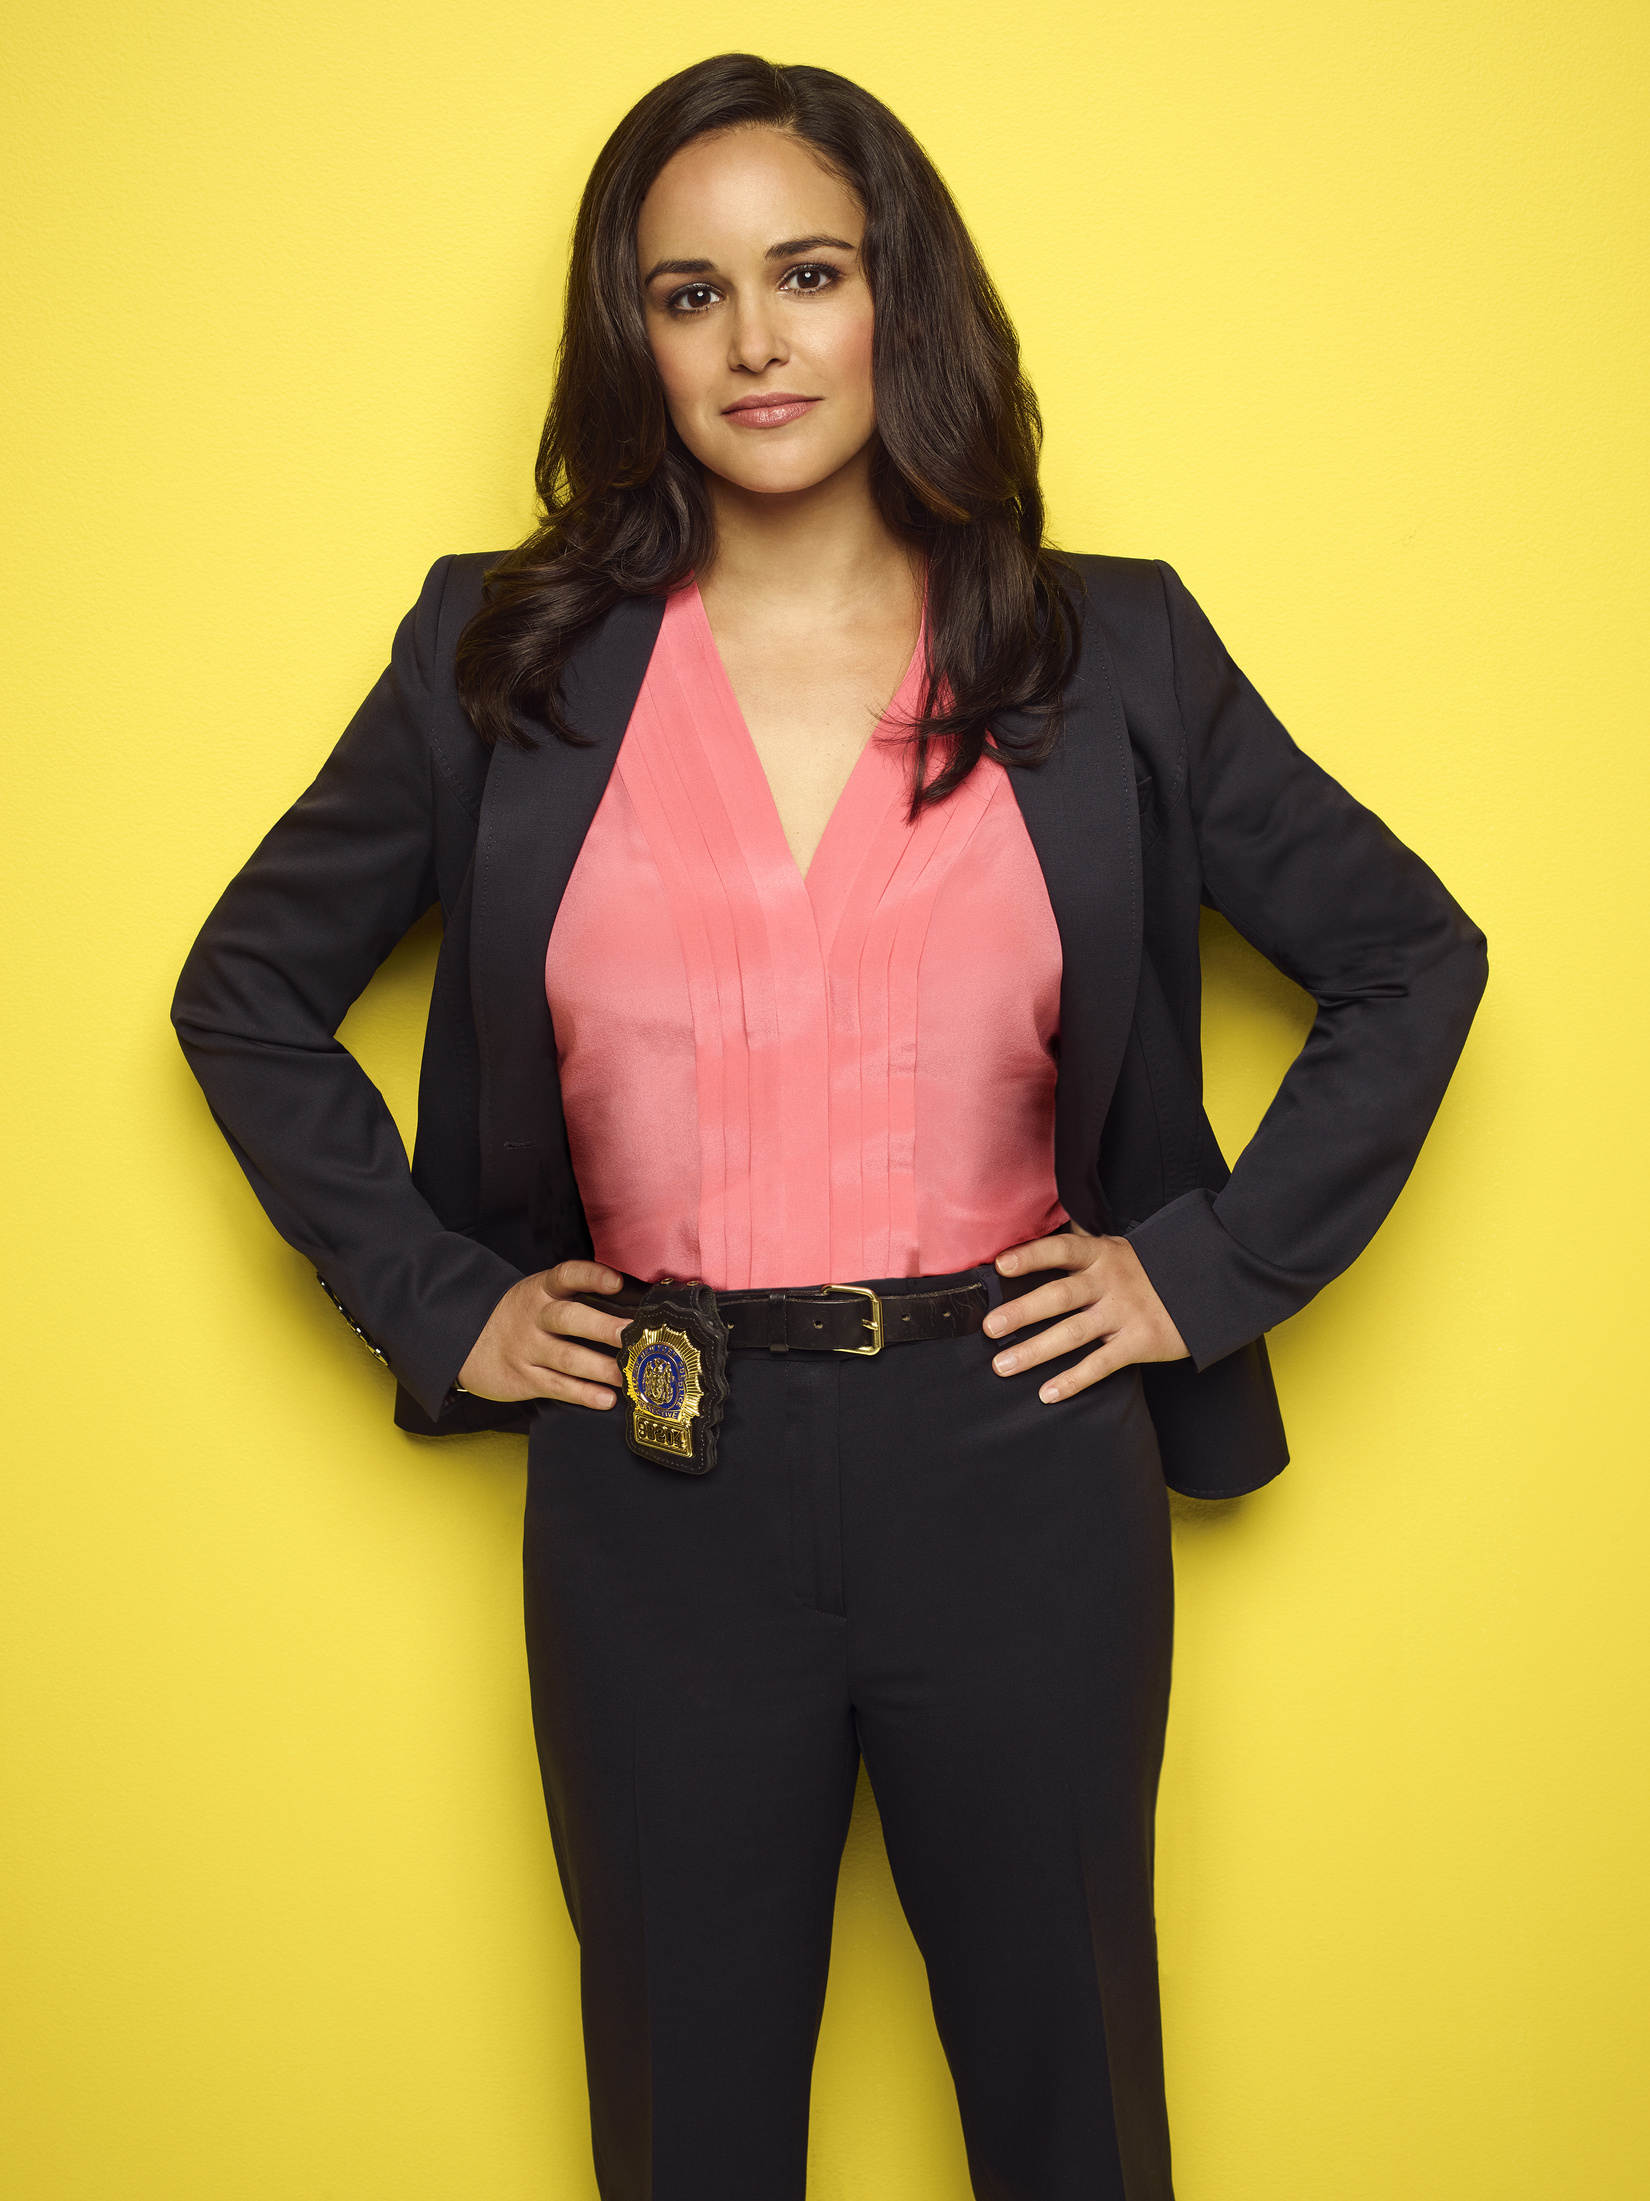 Brooklyn Nine-Nine (TV Series): First main role, American actress, Santiago, Chile, Amy Butler. 1650x2210 HD Wallpaper.